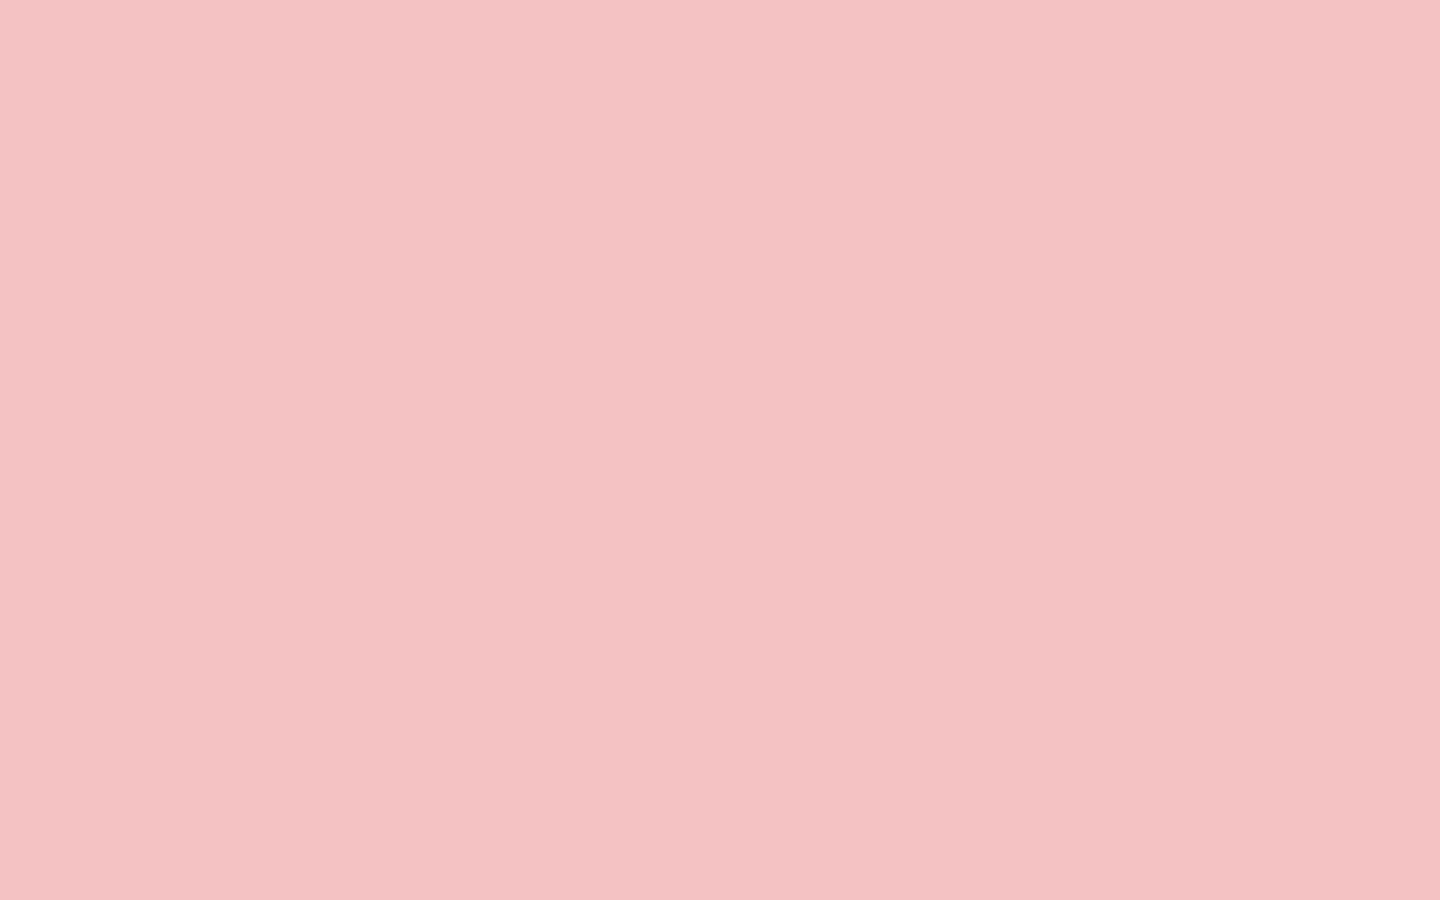  1440x900 resolution Baby Pink solid color background view and 1440x900